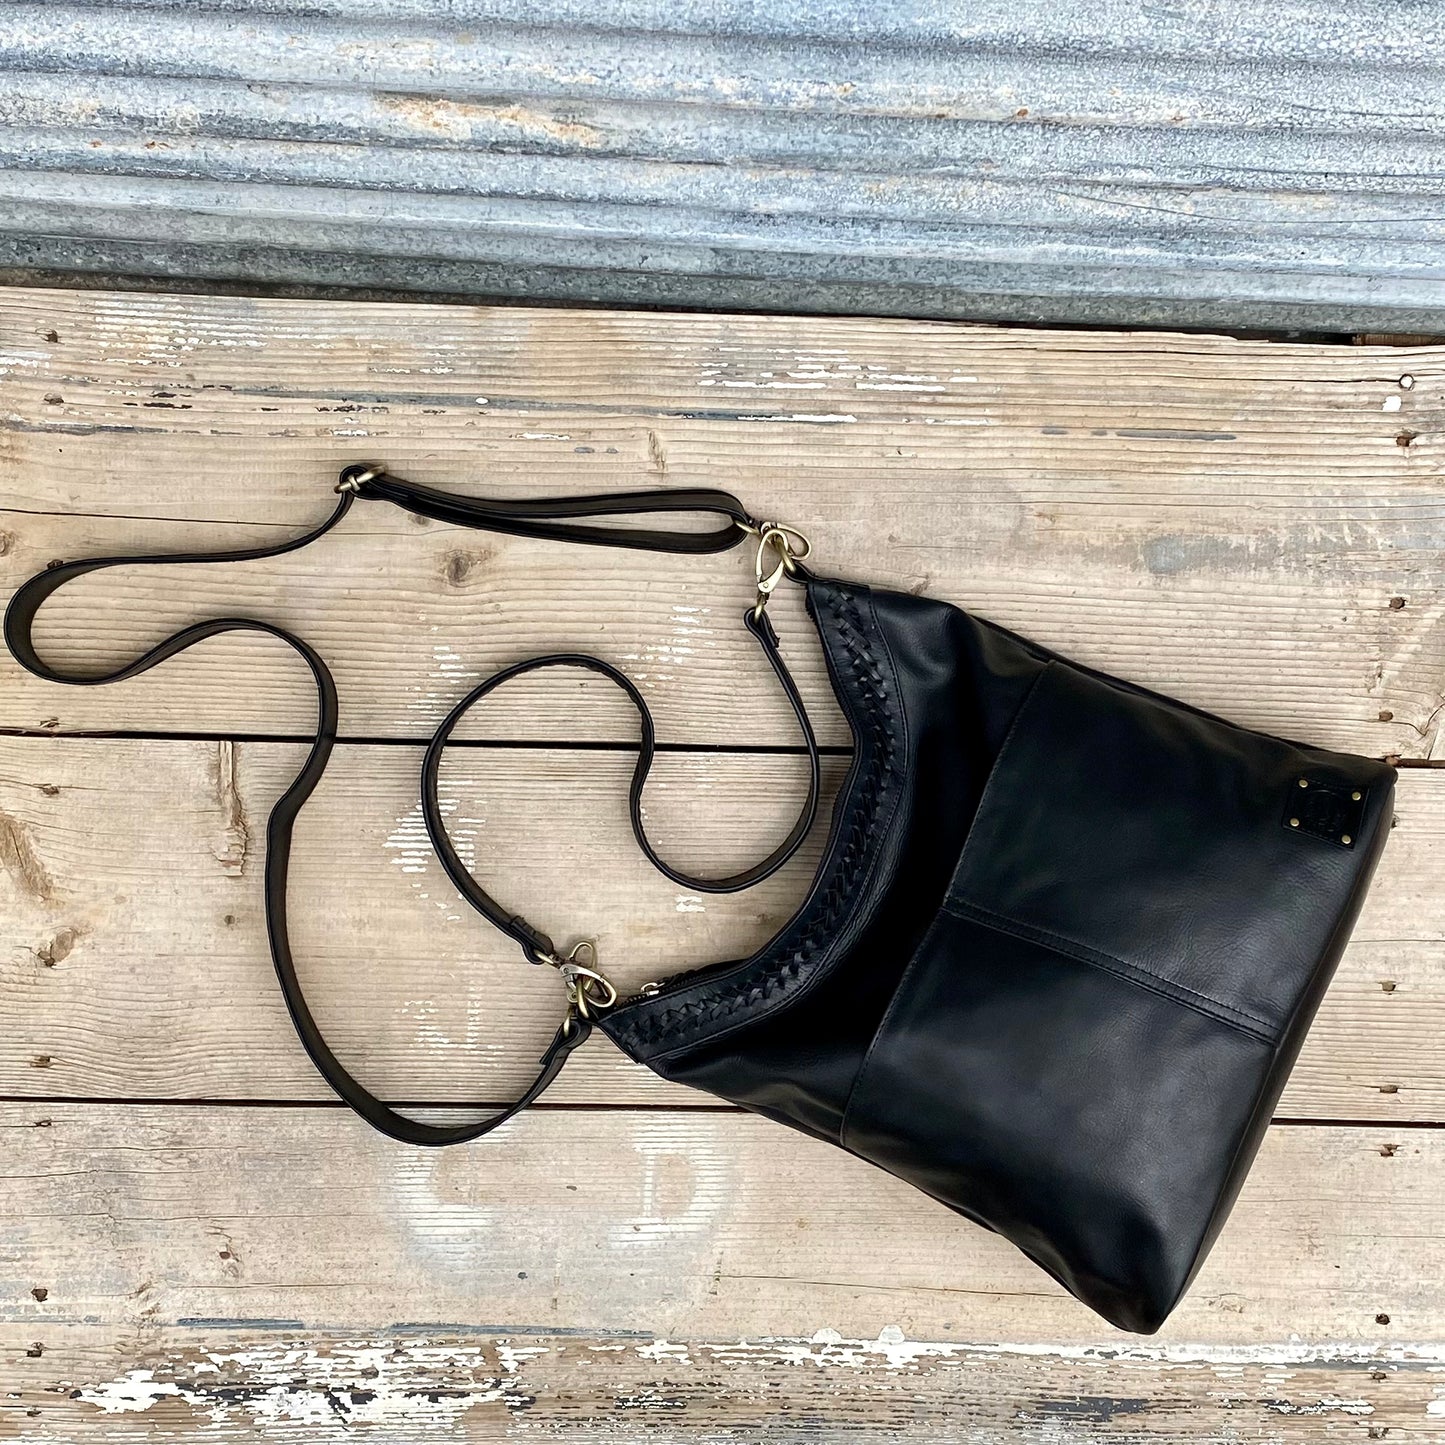 A Two Pocket Leather Bucket Bag